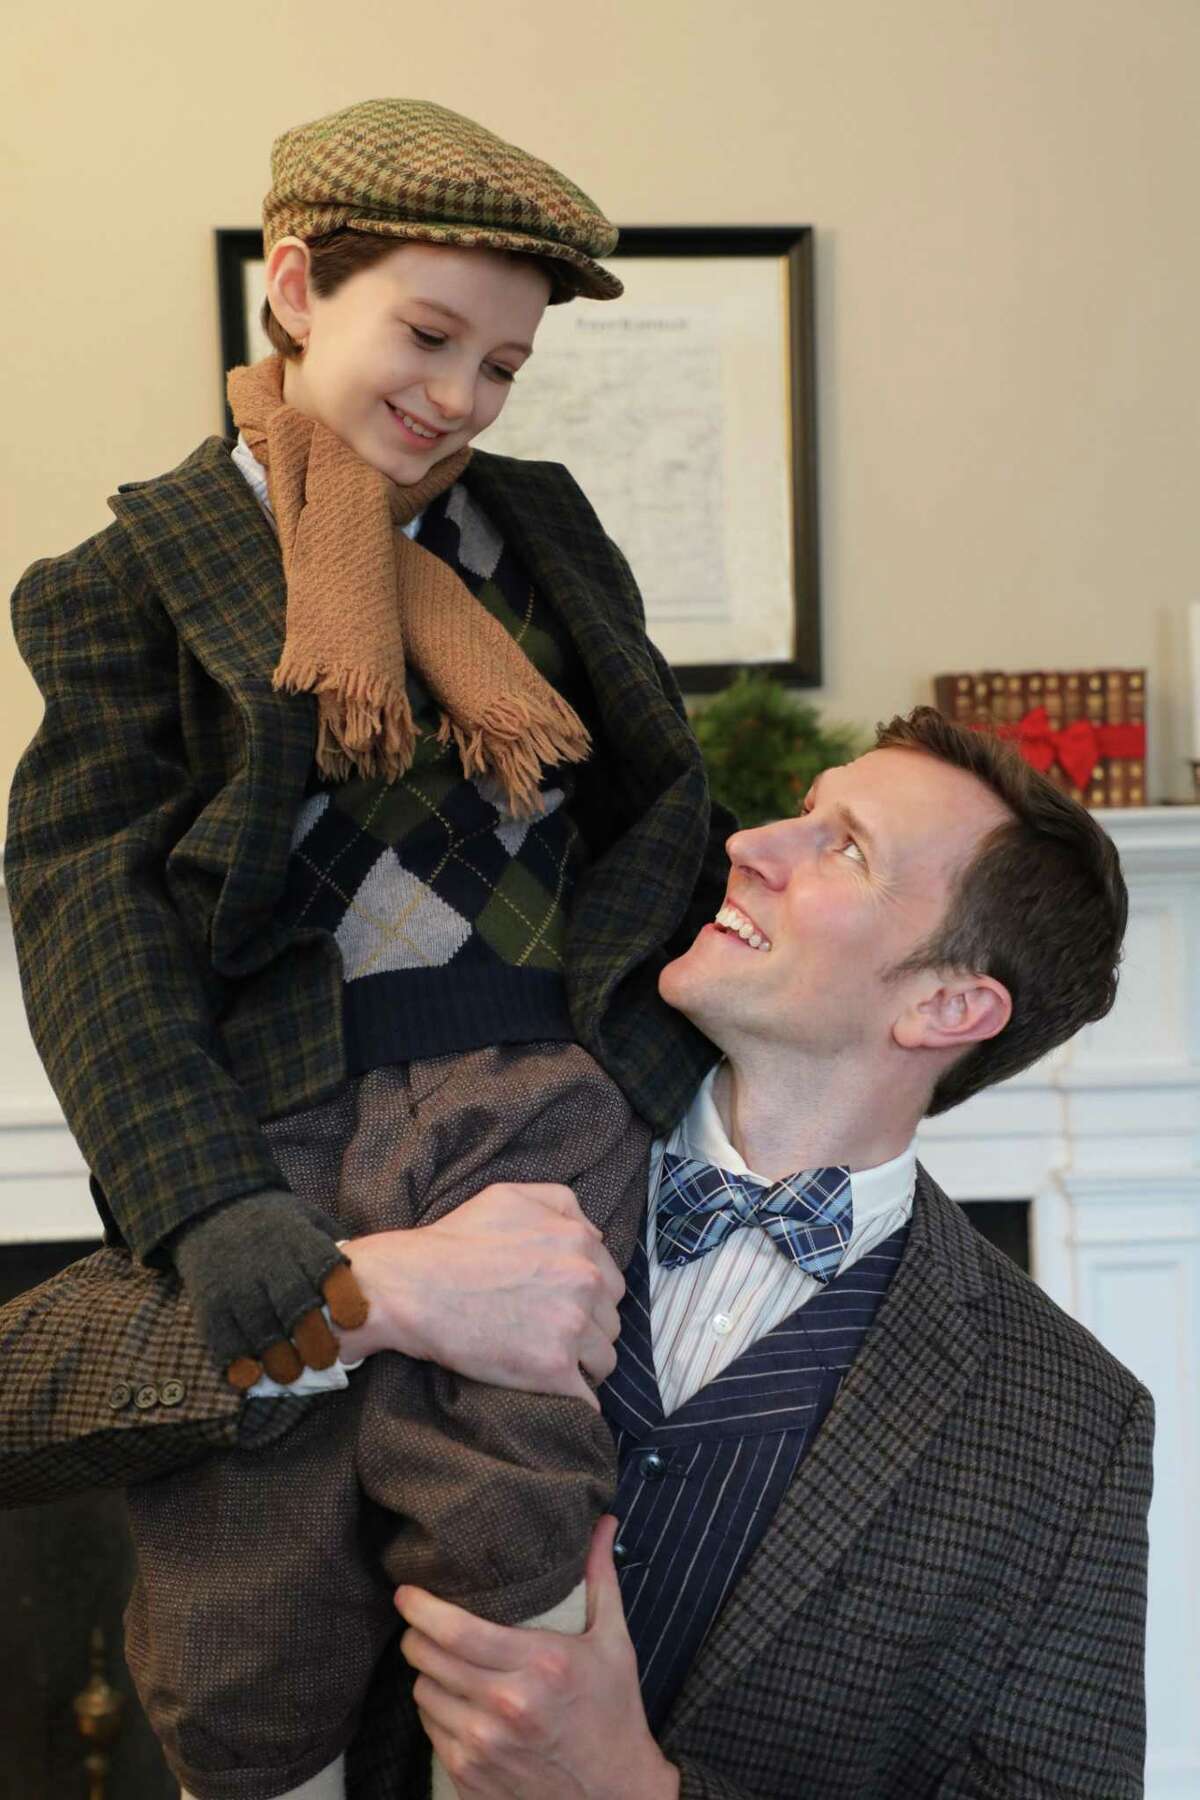 Connecticut native Robert Berson (Tiny Tim), left, with Matt Gibson (Bob Cratchit), in a scene from “A Connecticut Christmas Carol,” presented by Goodspeed Musicals, Nov. 17 through Dec. 24 at the Terris Theatre in Chester.